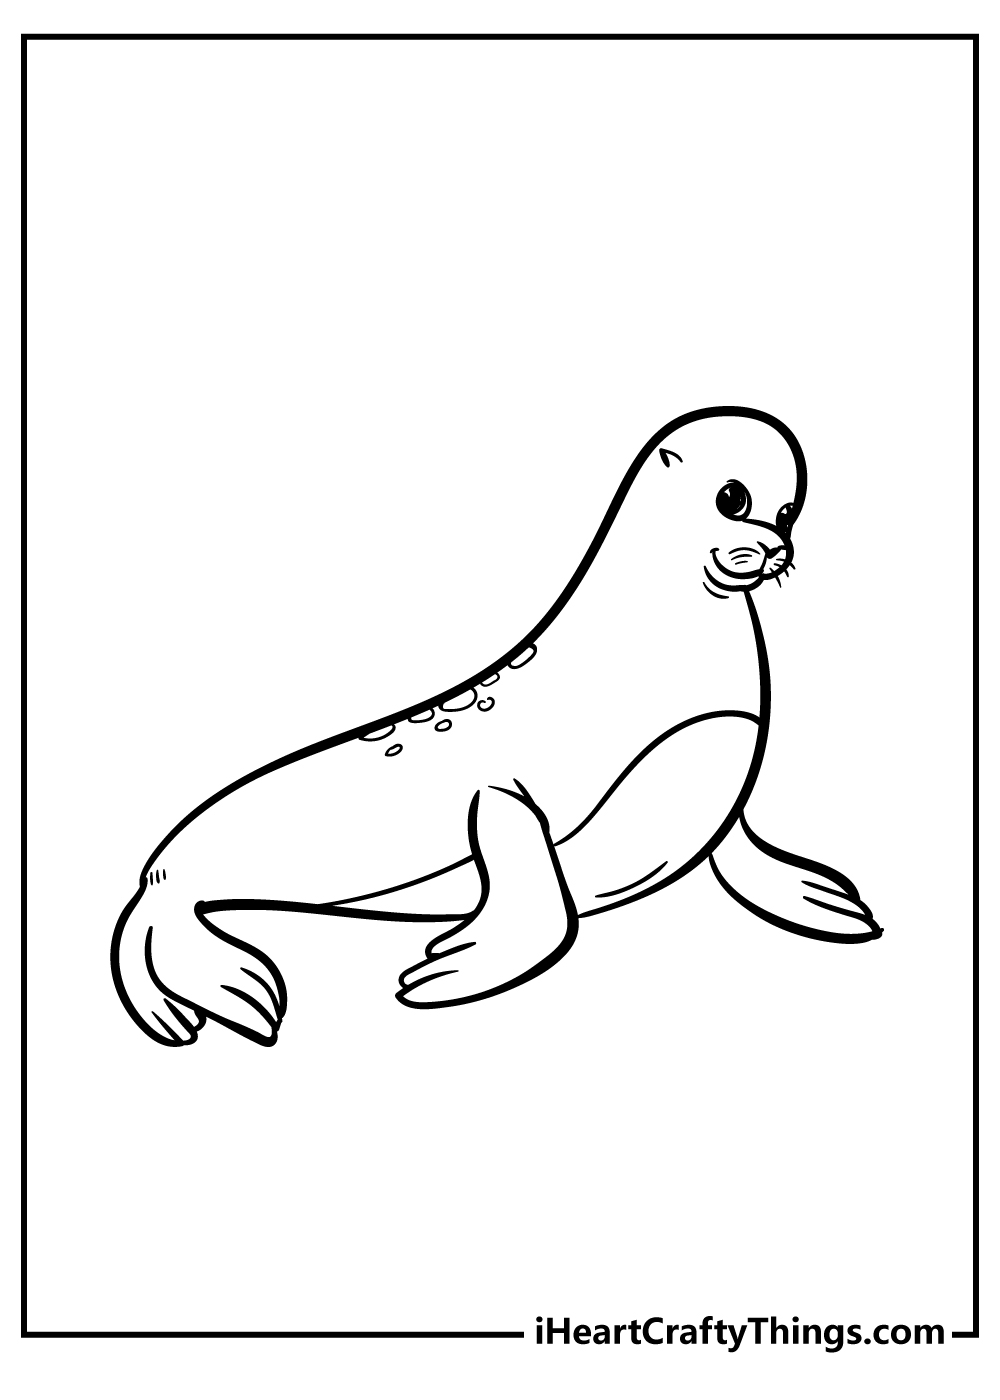 Seal Coloring Pages free pdf download